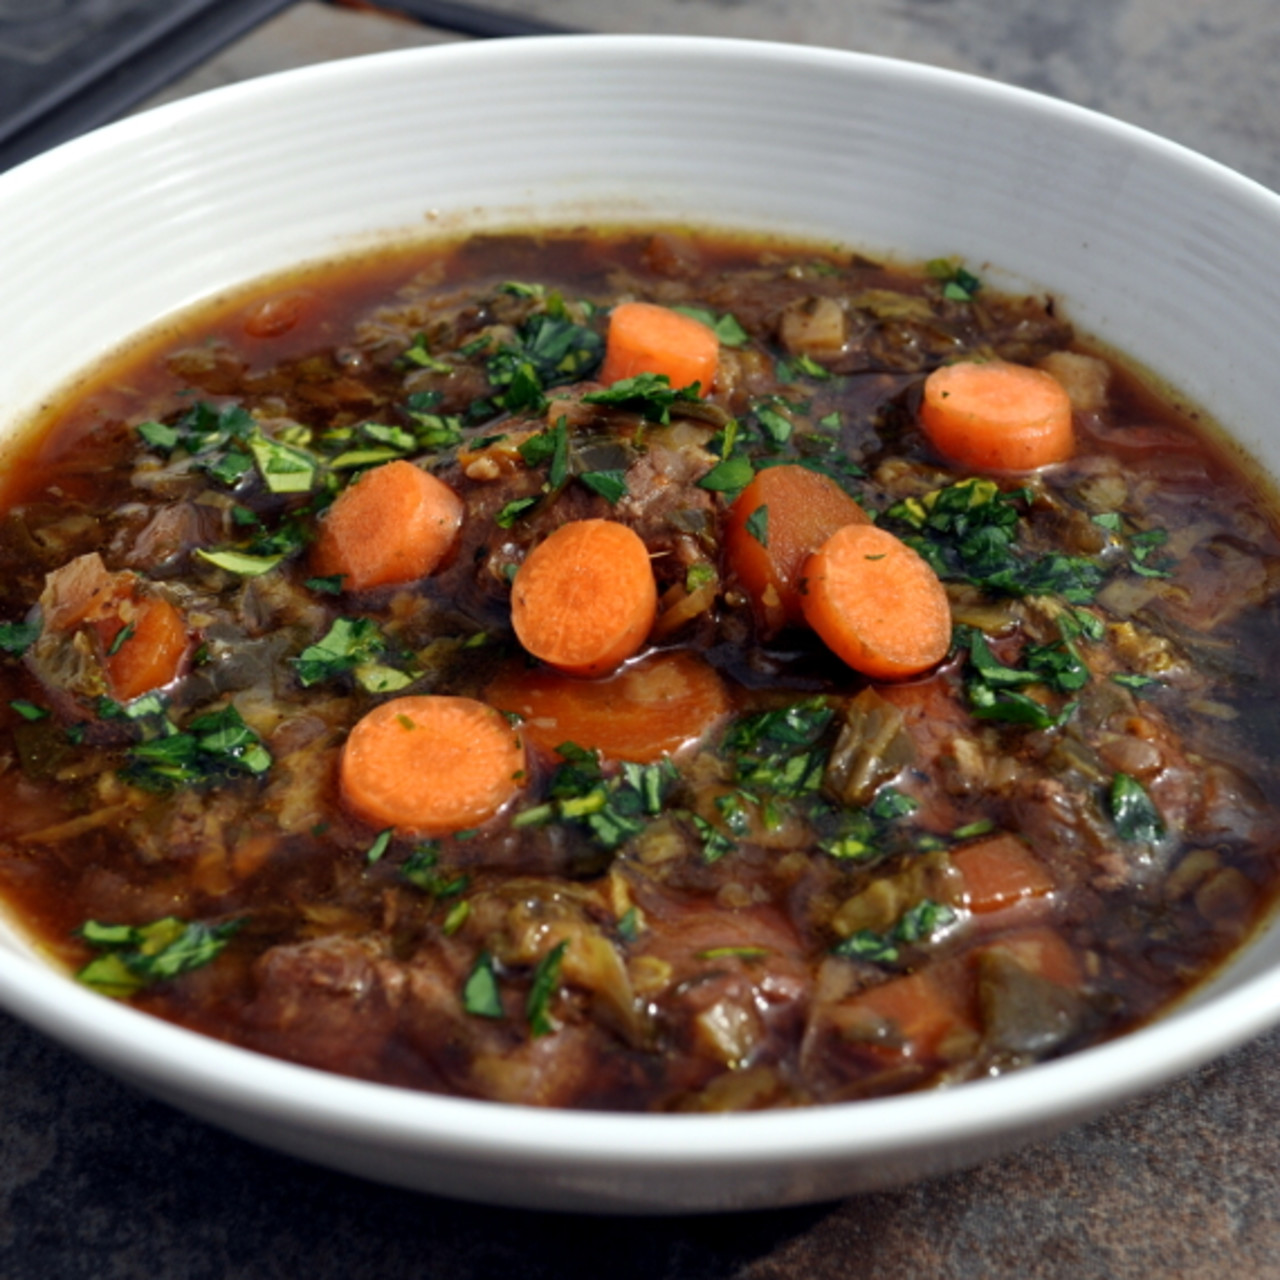 Hearty Winter Vegetable Stew